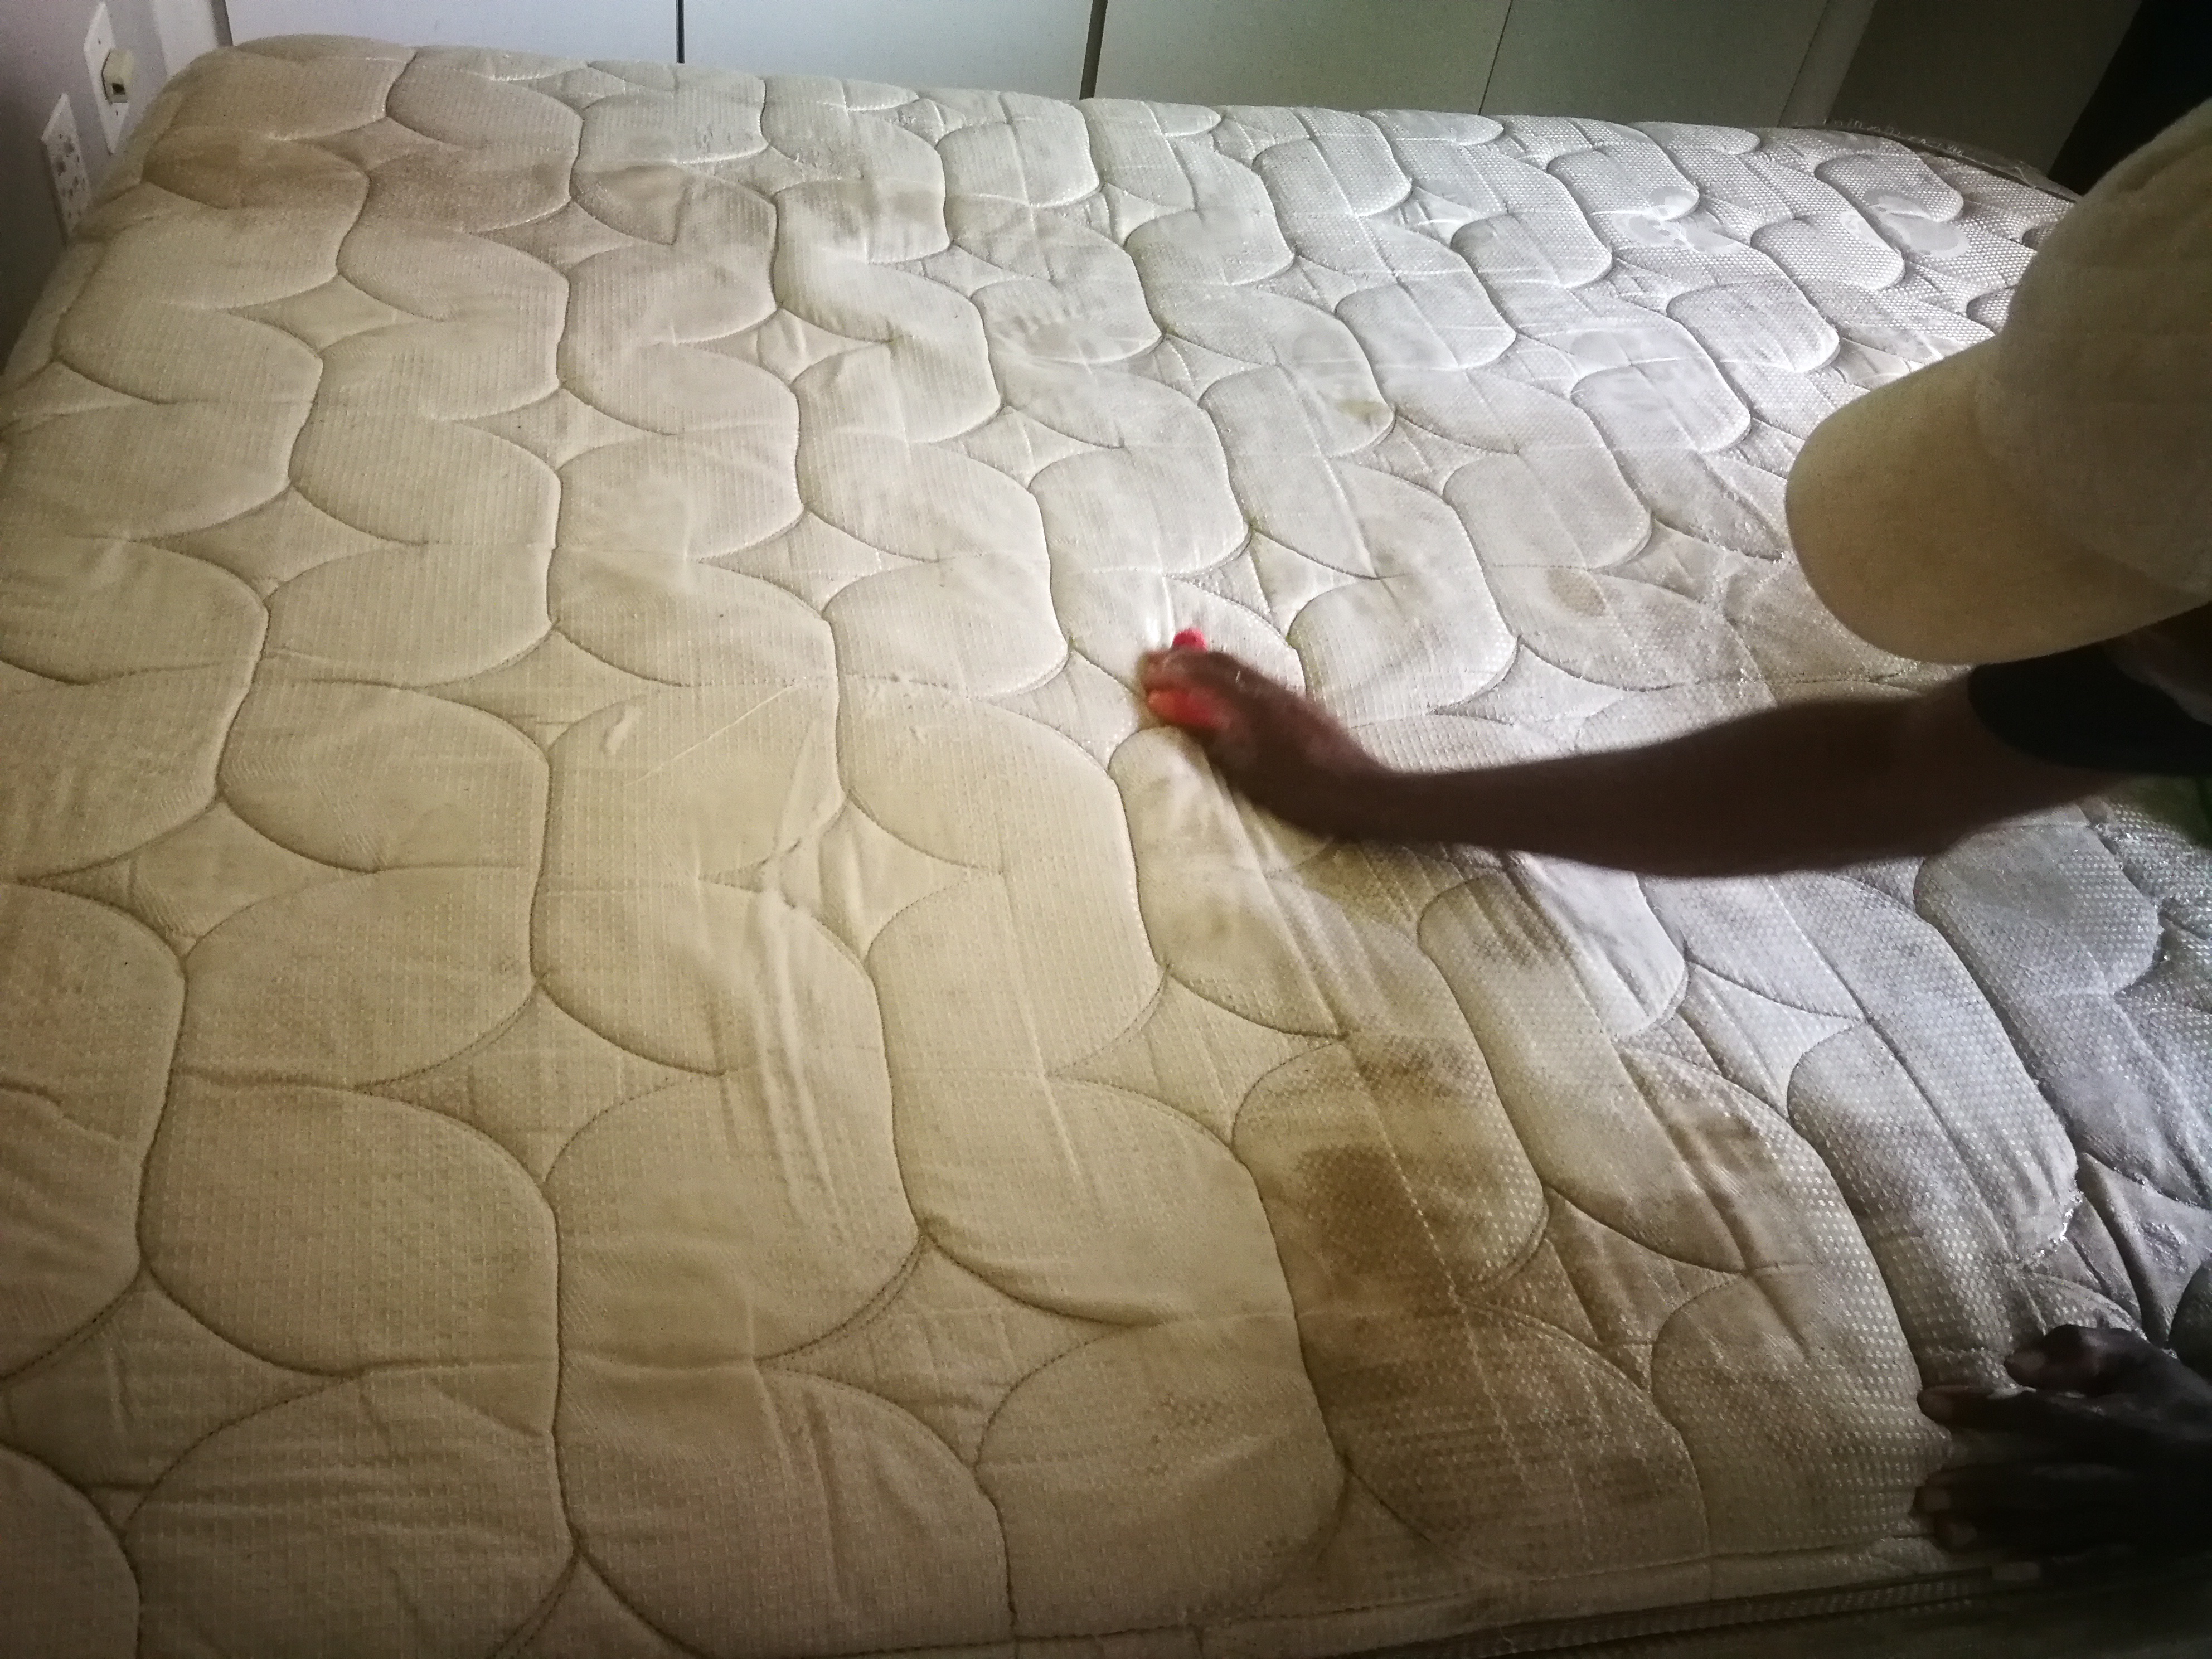 Deep mattress cleaning in tbe process 